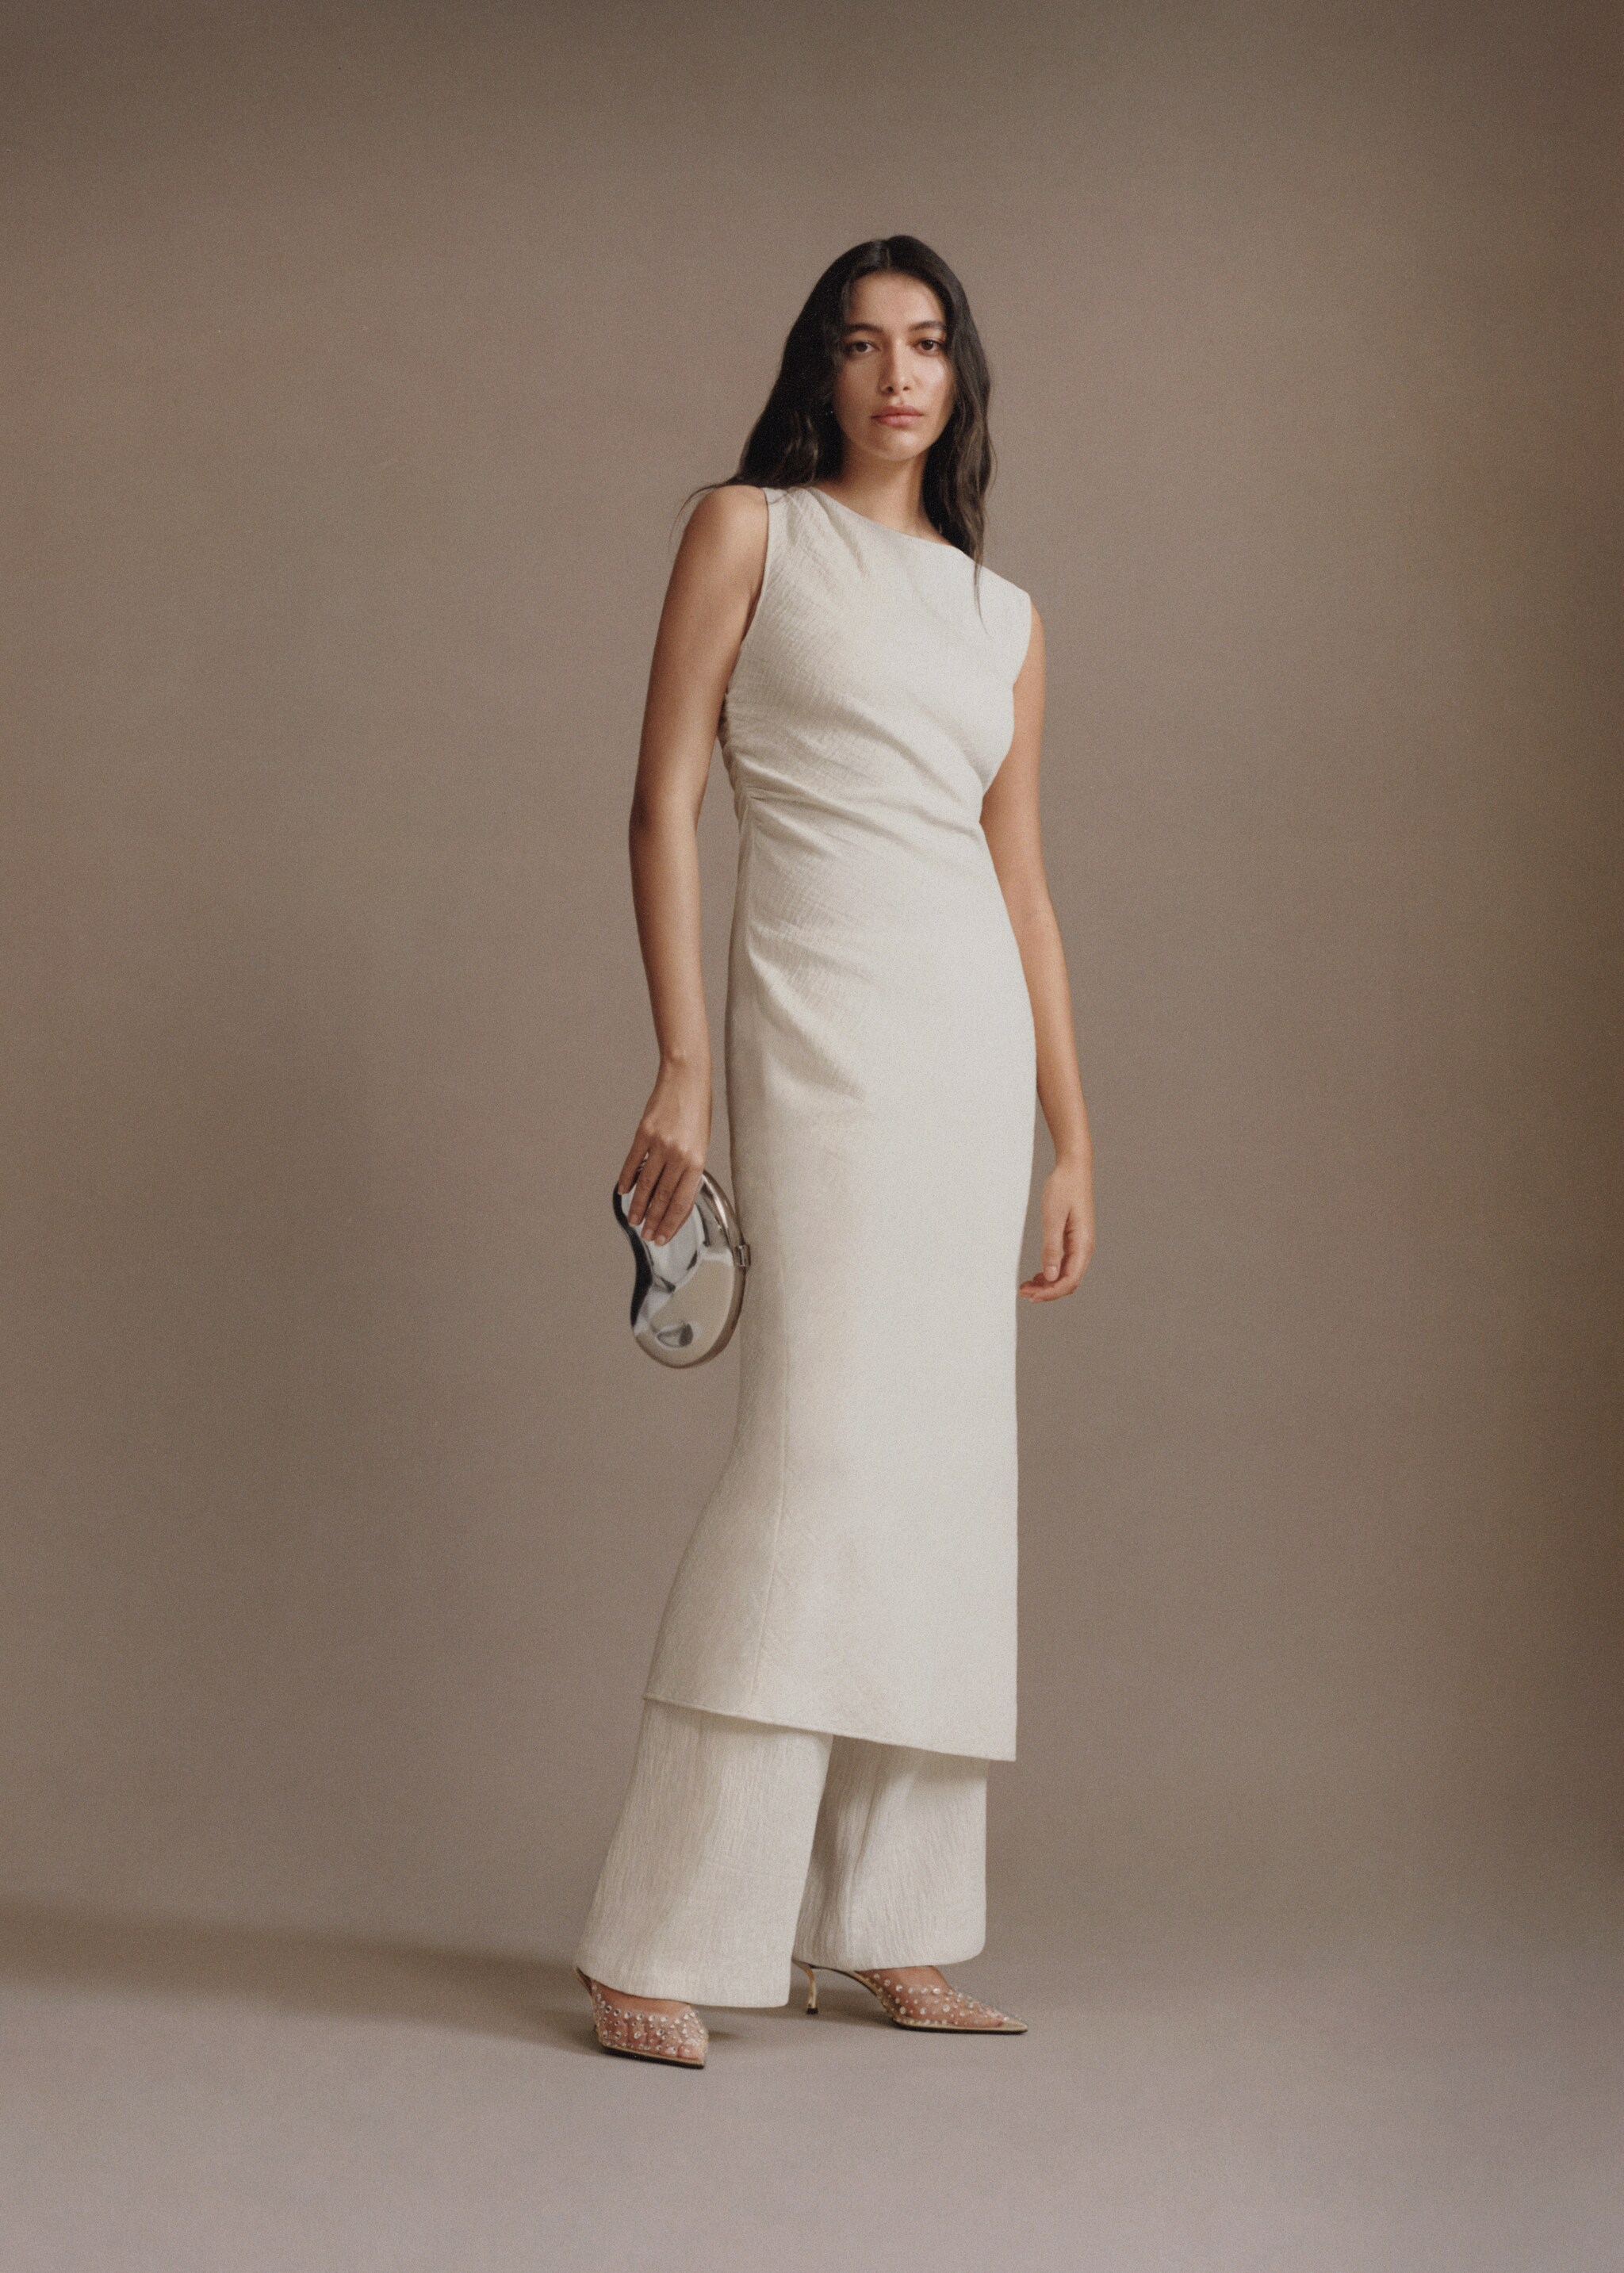 Draped dress with slit - Details of the article 9